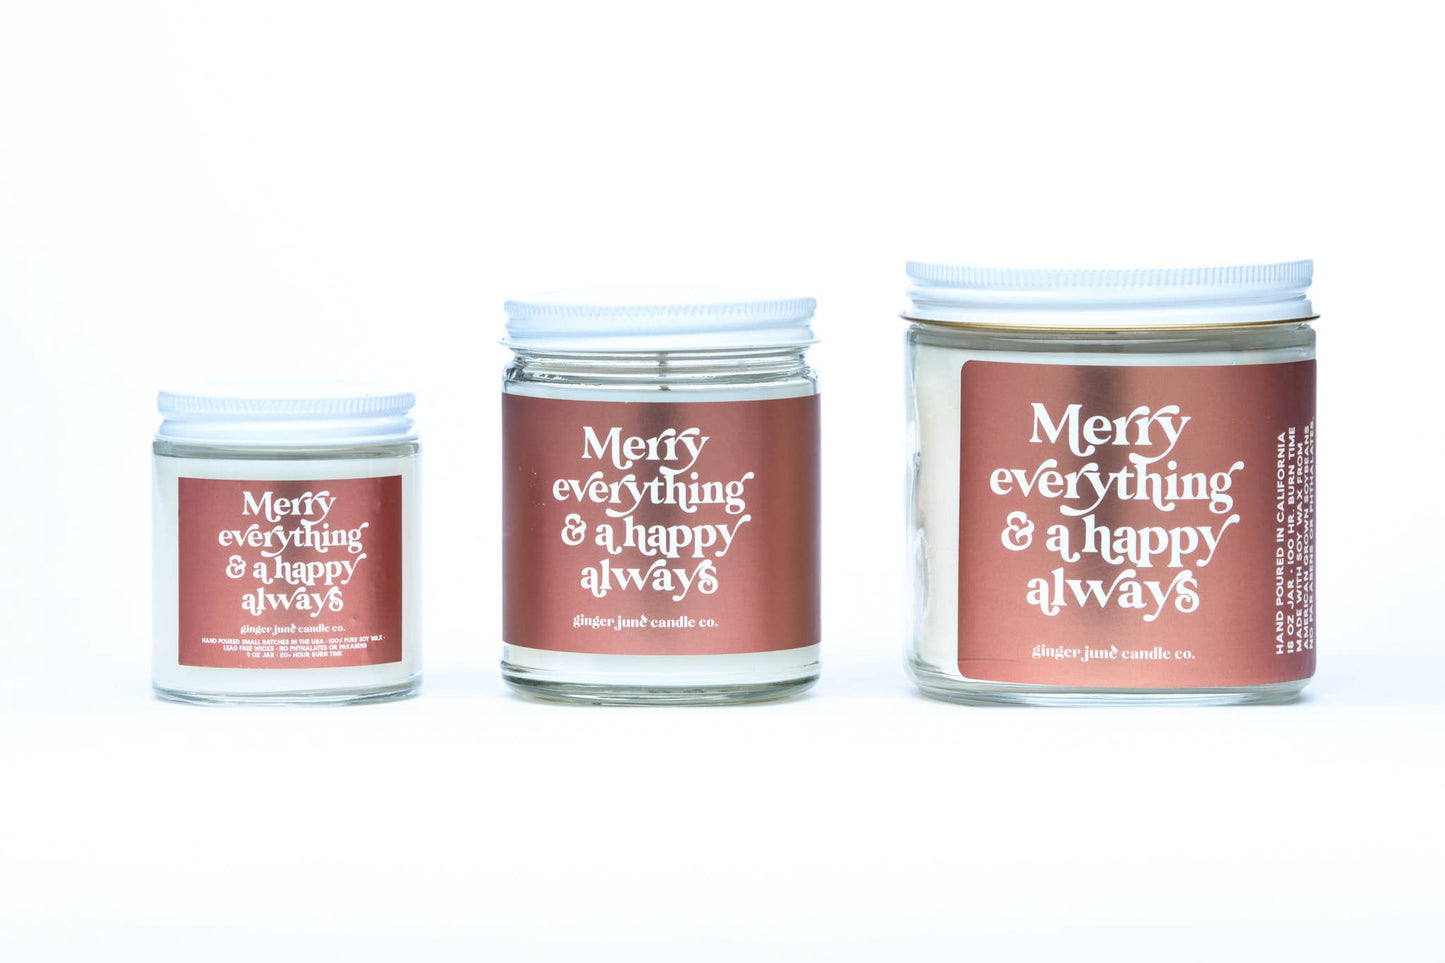 merry everything & a happy always • NON TOXIC SOY CANDLE